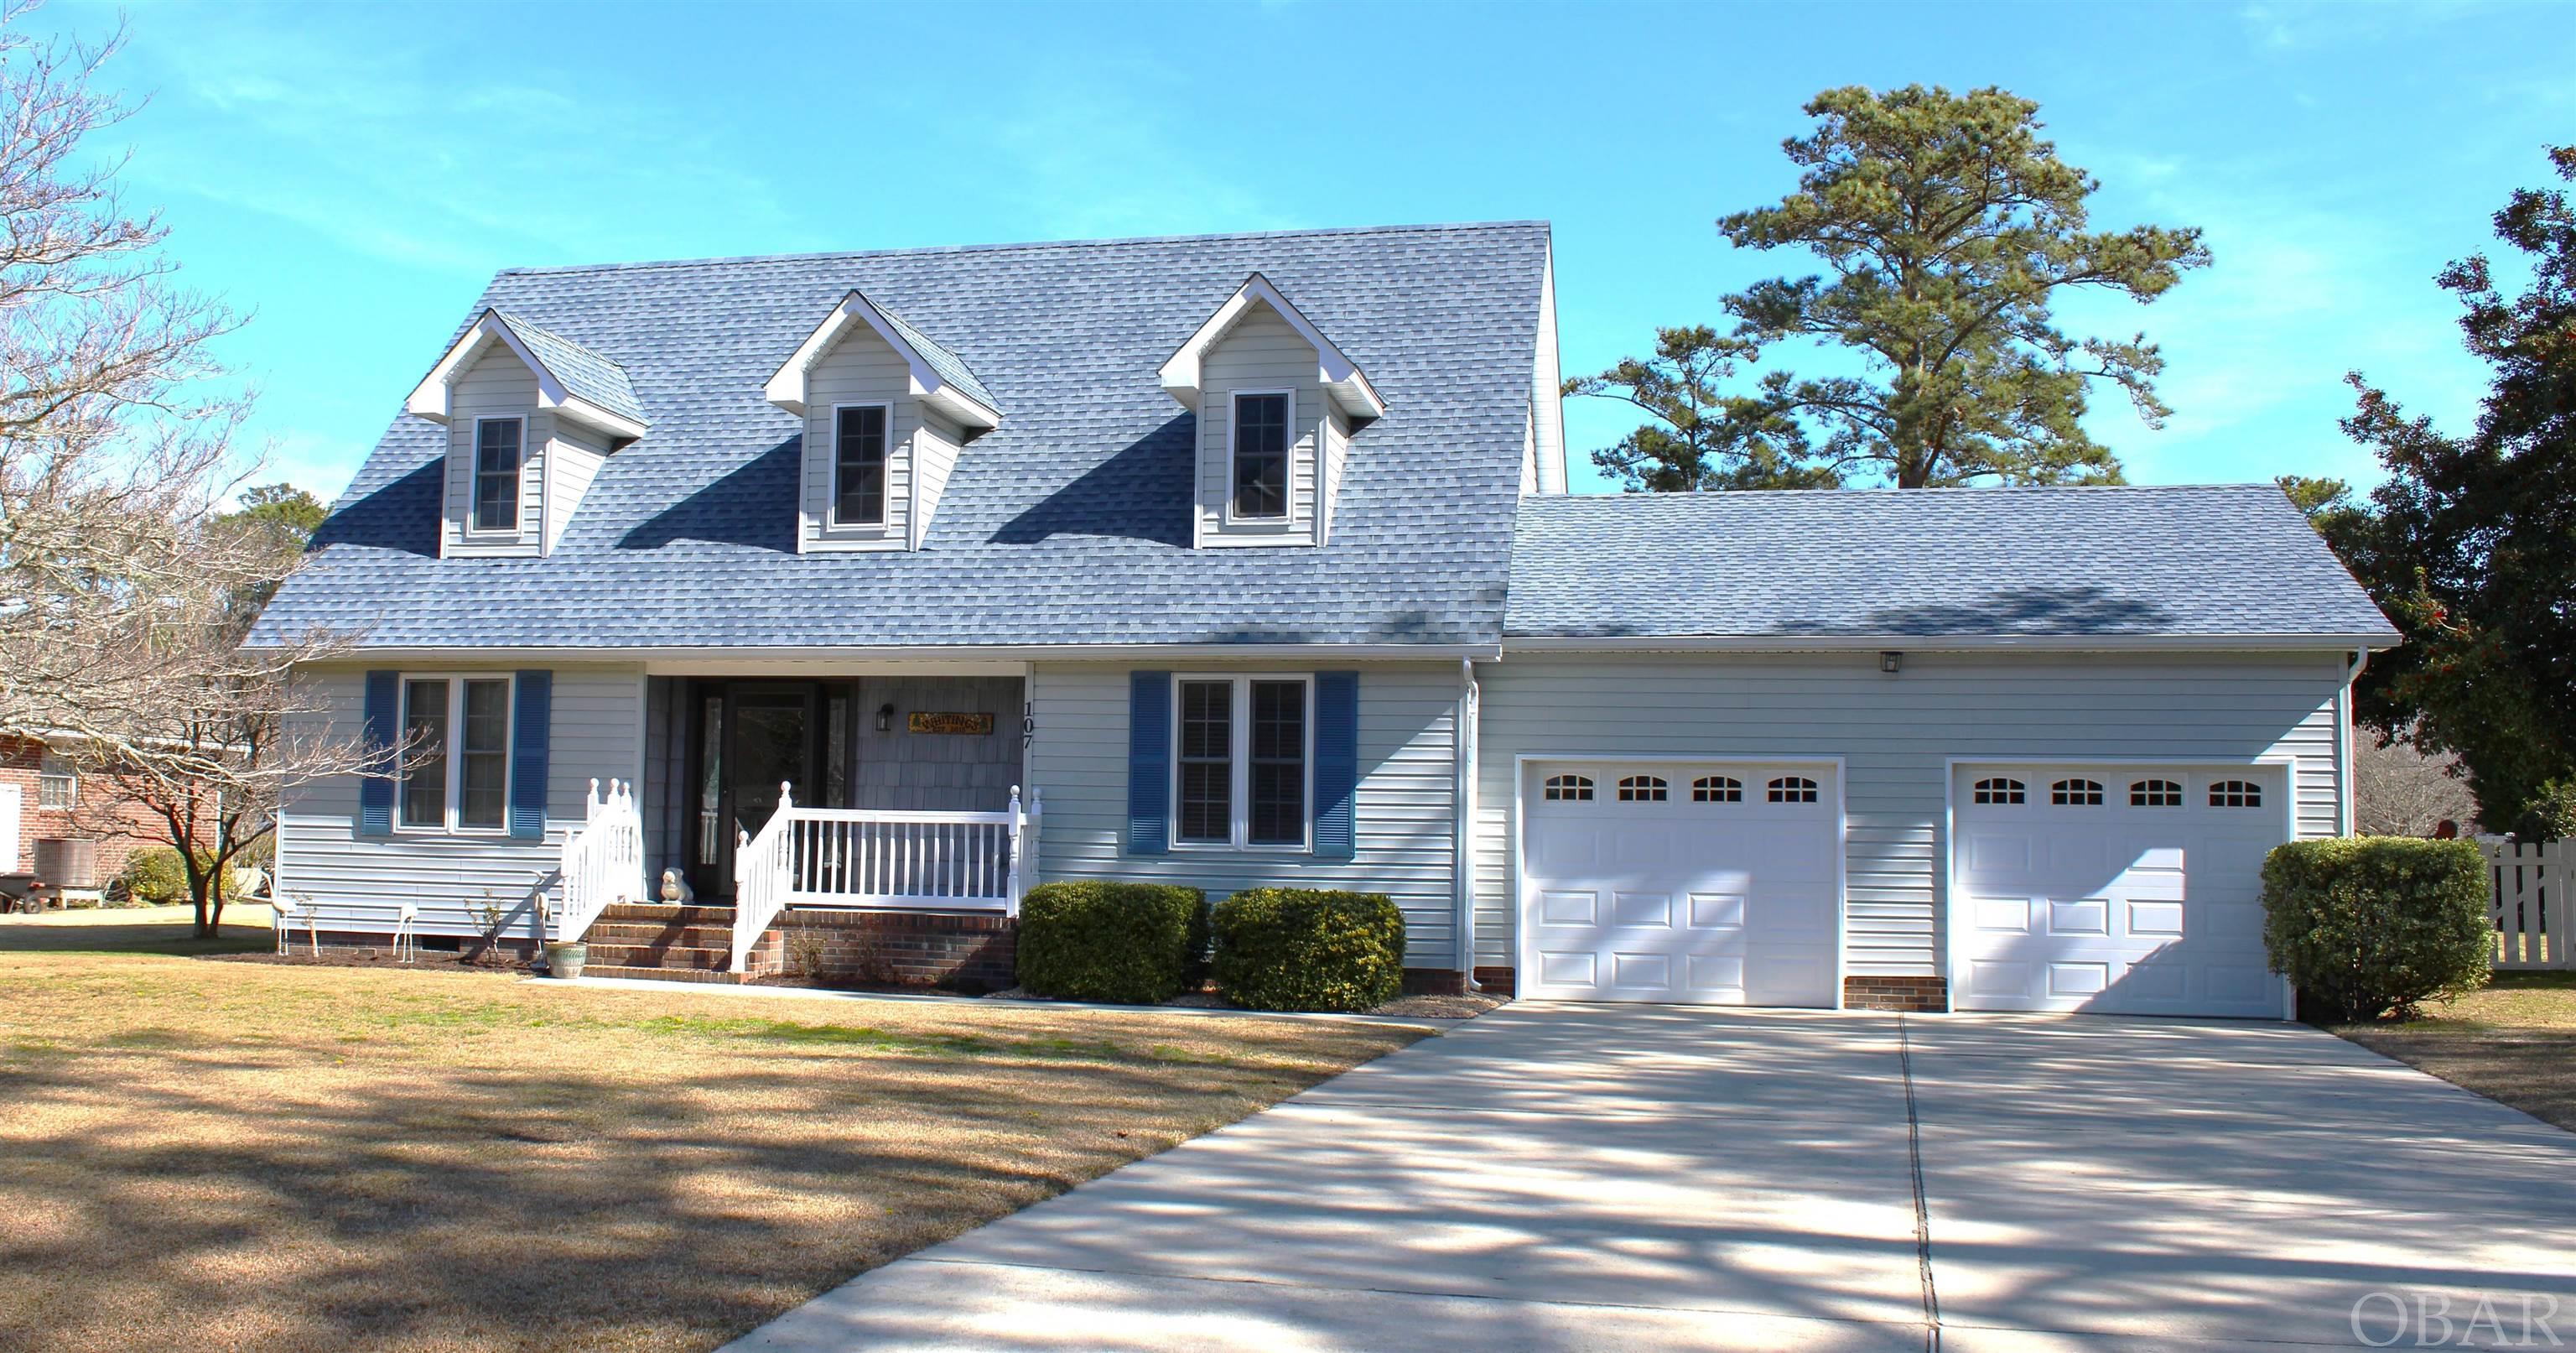 107 Inge Dr, Manteo- Beautiful 3bd/3bth home for sale in Manteo on a huge 22,000sq ft lot with a fenced in back yard and 2 car garage. If you are looking for a place to call home then you have to check out this house. As you walk into the house you enter the original portion of the house. This area has an updated ensuite bedroom, hall full bath, bonus room(currently used as a bedroom), office/playroom, and the massive open addition that includes the living, dining, and kitchen area. This area also overlooks the back yard and has access to the deck. Off the Living area there is a laundry room and sun room with access to the 2 car garage. The top floor has 2 more bedrooms that share a hall full bath plus there is storage off the hallway. New roof in 2020! Conveniently located on a cul-de-sac street in the heart of Manteo close to schools, downtown Manteo, area attractions, shops, and restaurants. The beach is approximately 15 minuets away. This house checks all the boxes so don't wait or it will be gone!